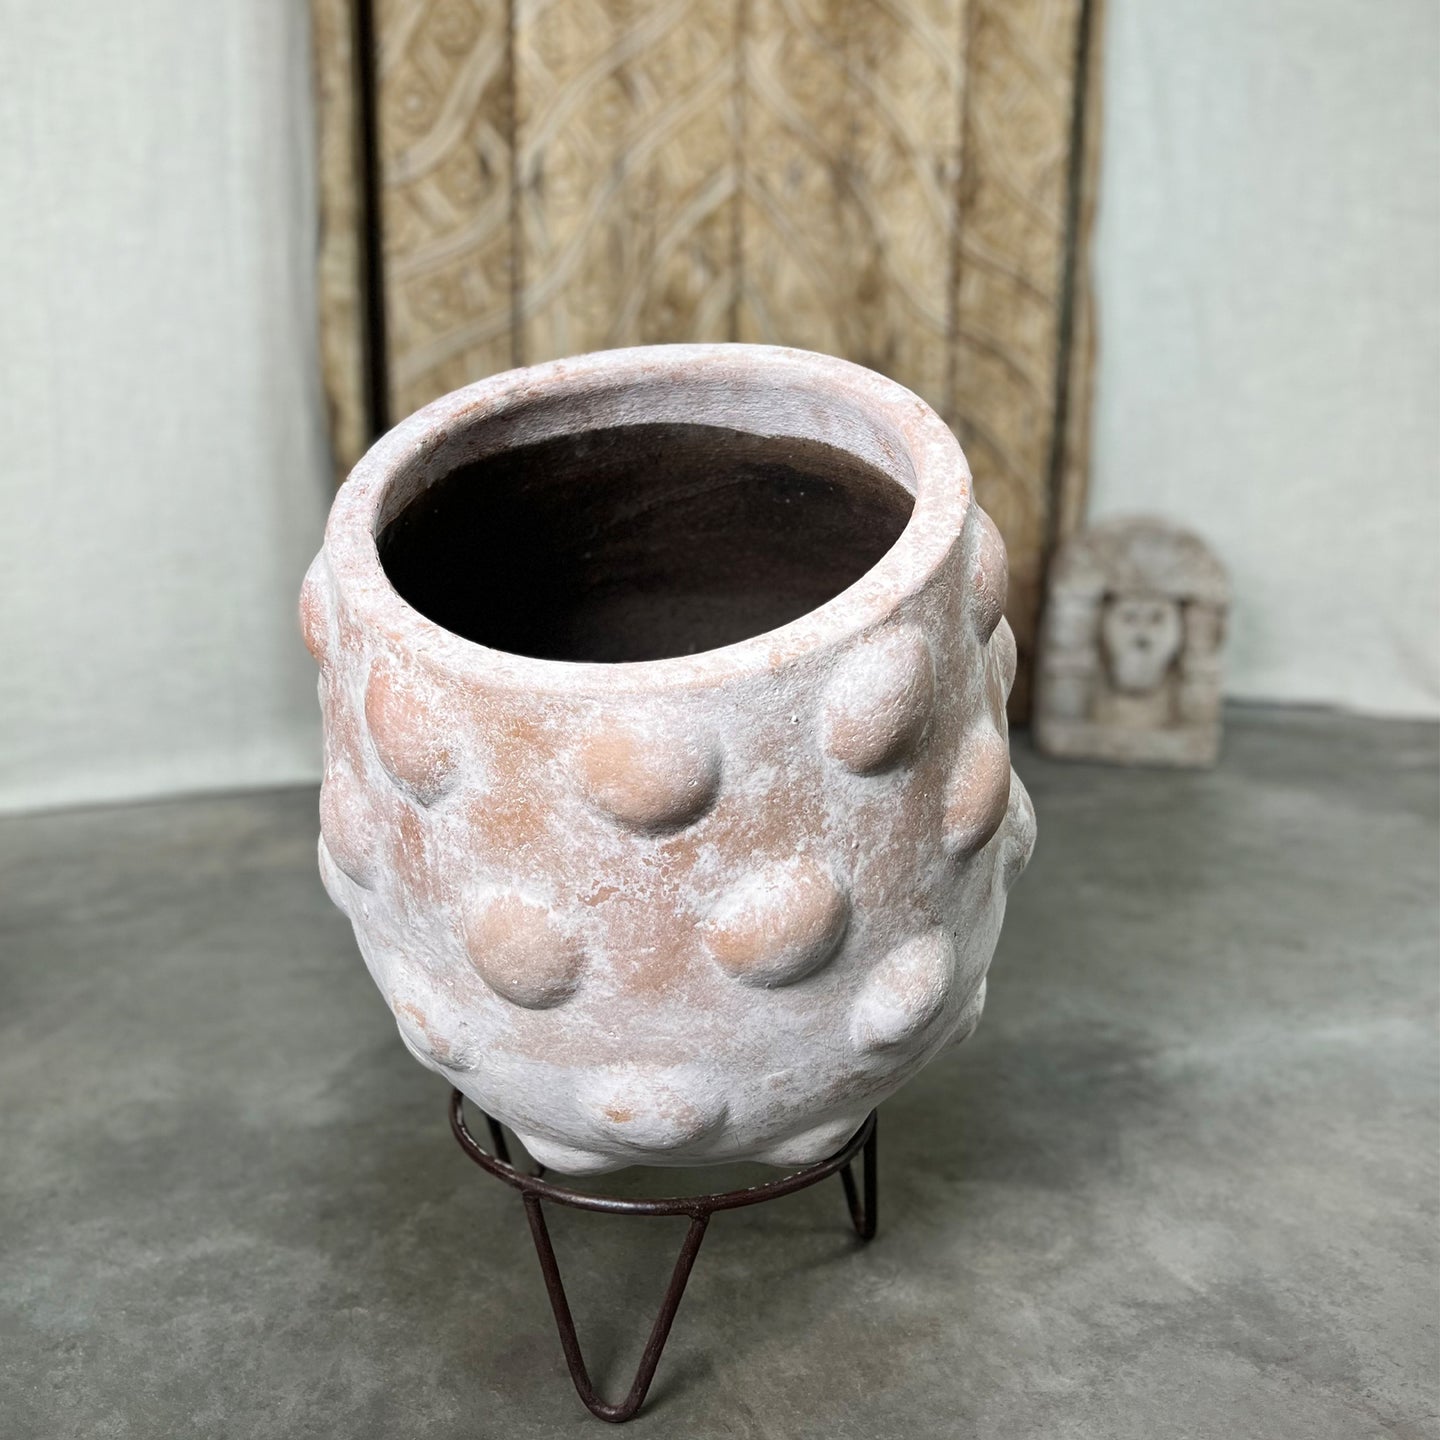 Yucatec Planter with Iron Stand. Terracotta pot.